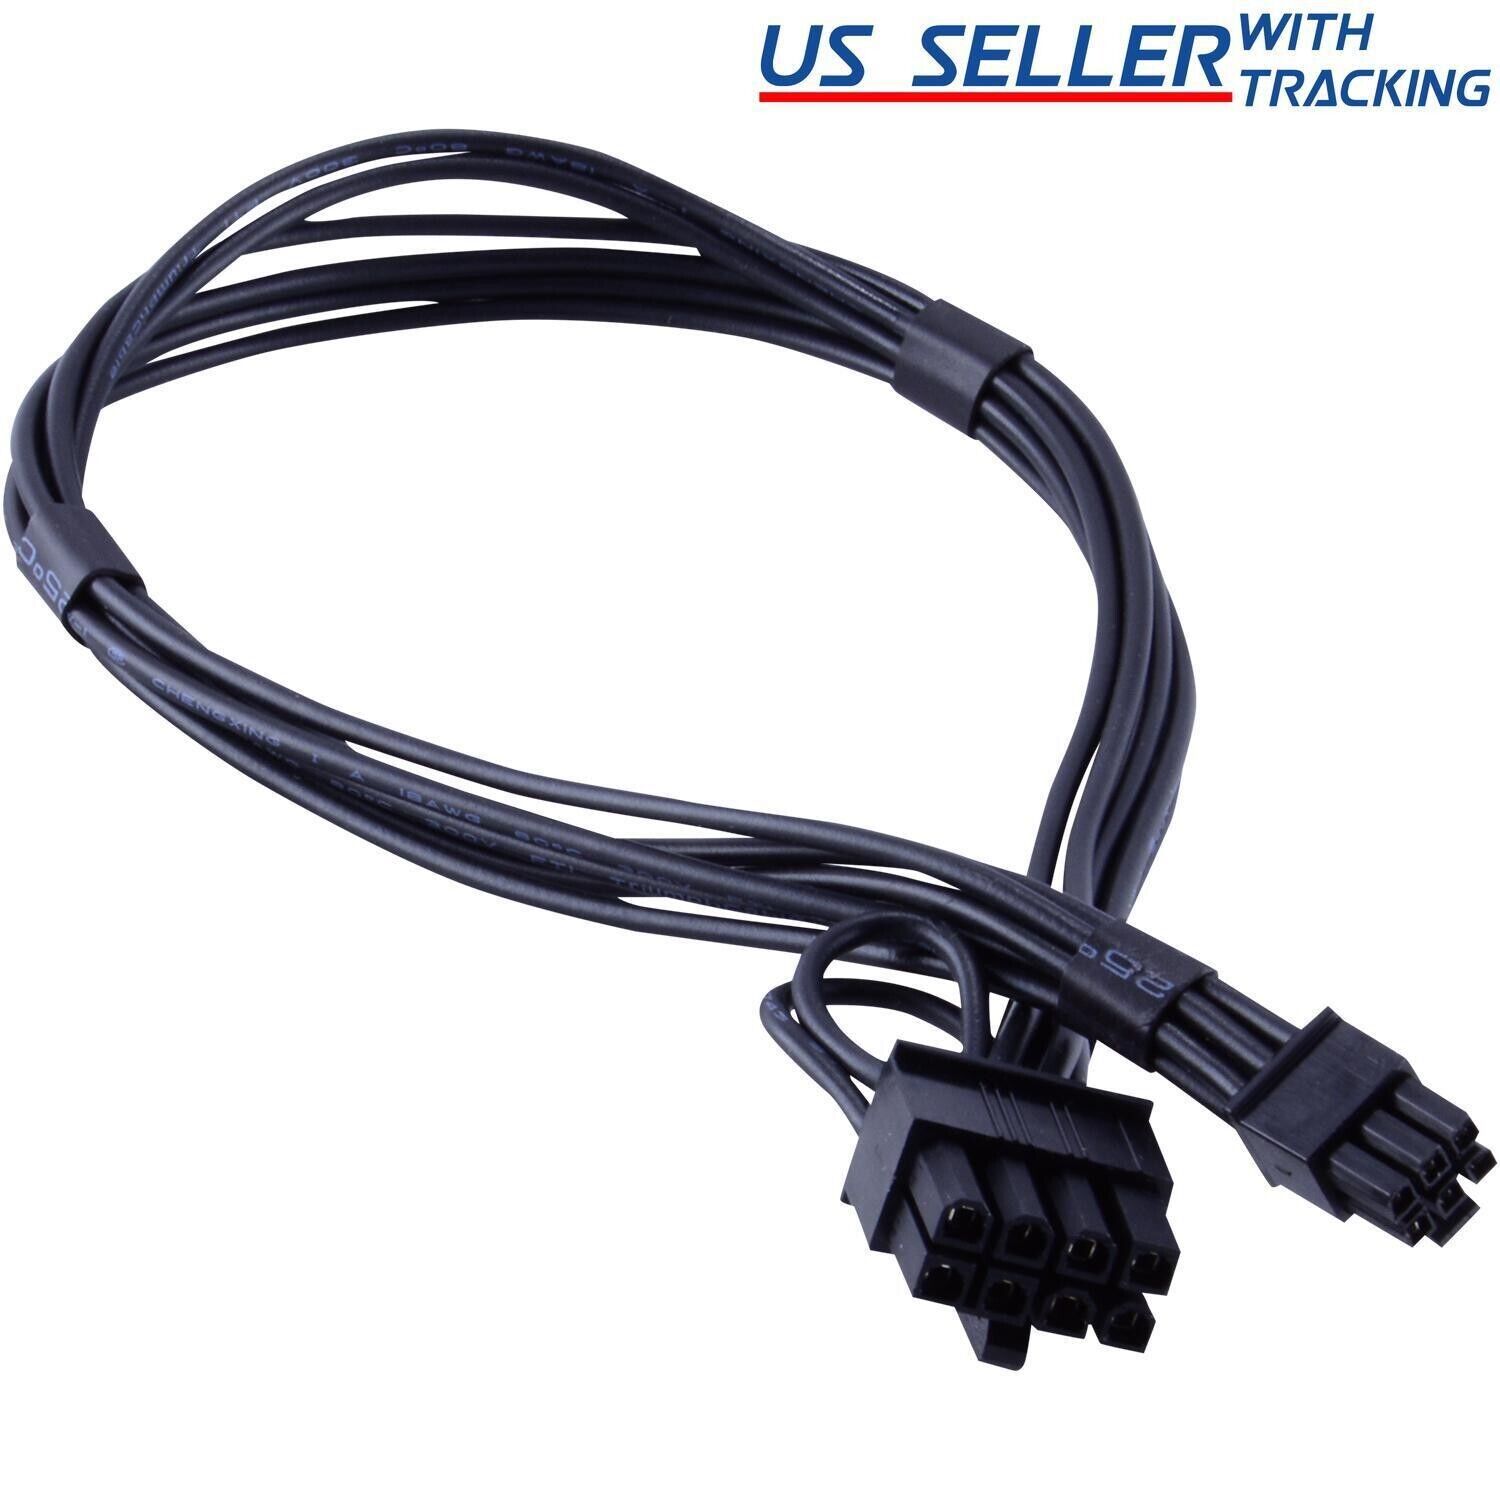 Mini 6-pin to 8-pin PCIe PCI-e Video Card Power Cable for Apple Mac Pro Tower